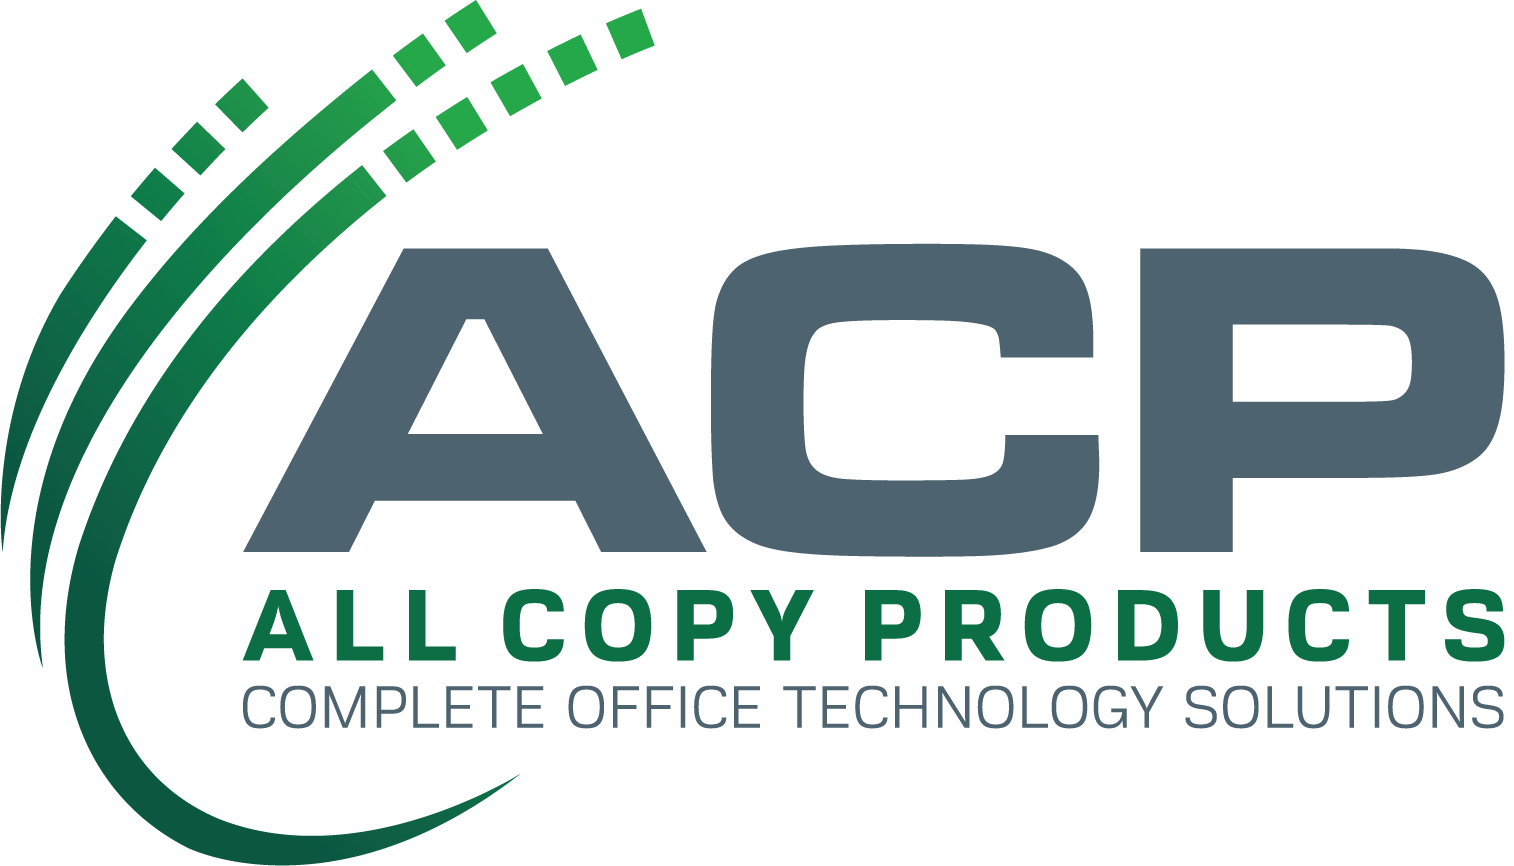 All Copy Acquires Colorado-Based Dealer; Gains Toner Cartridge Remanufacturing Capabilities - Industry Analysts, Inc.